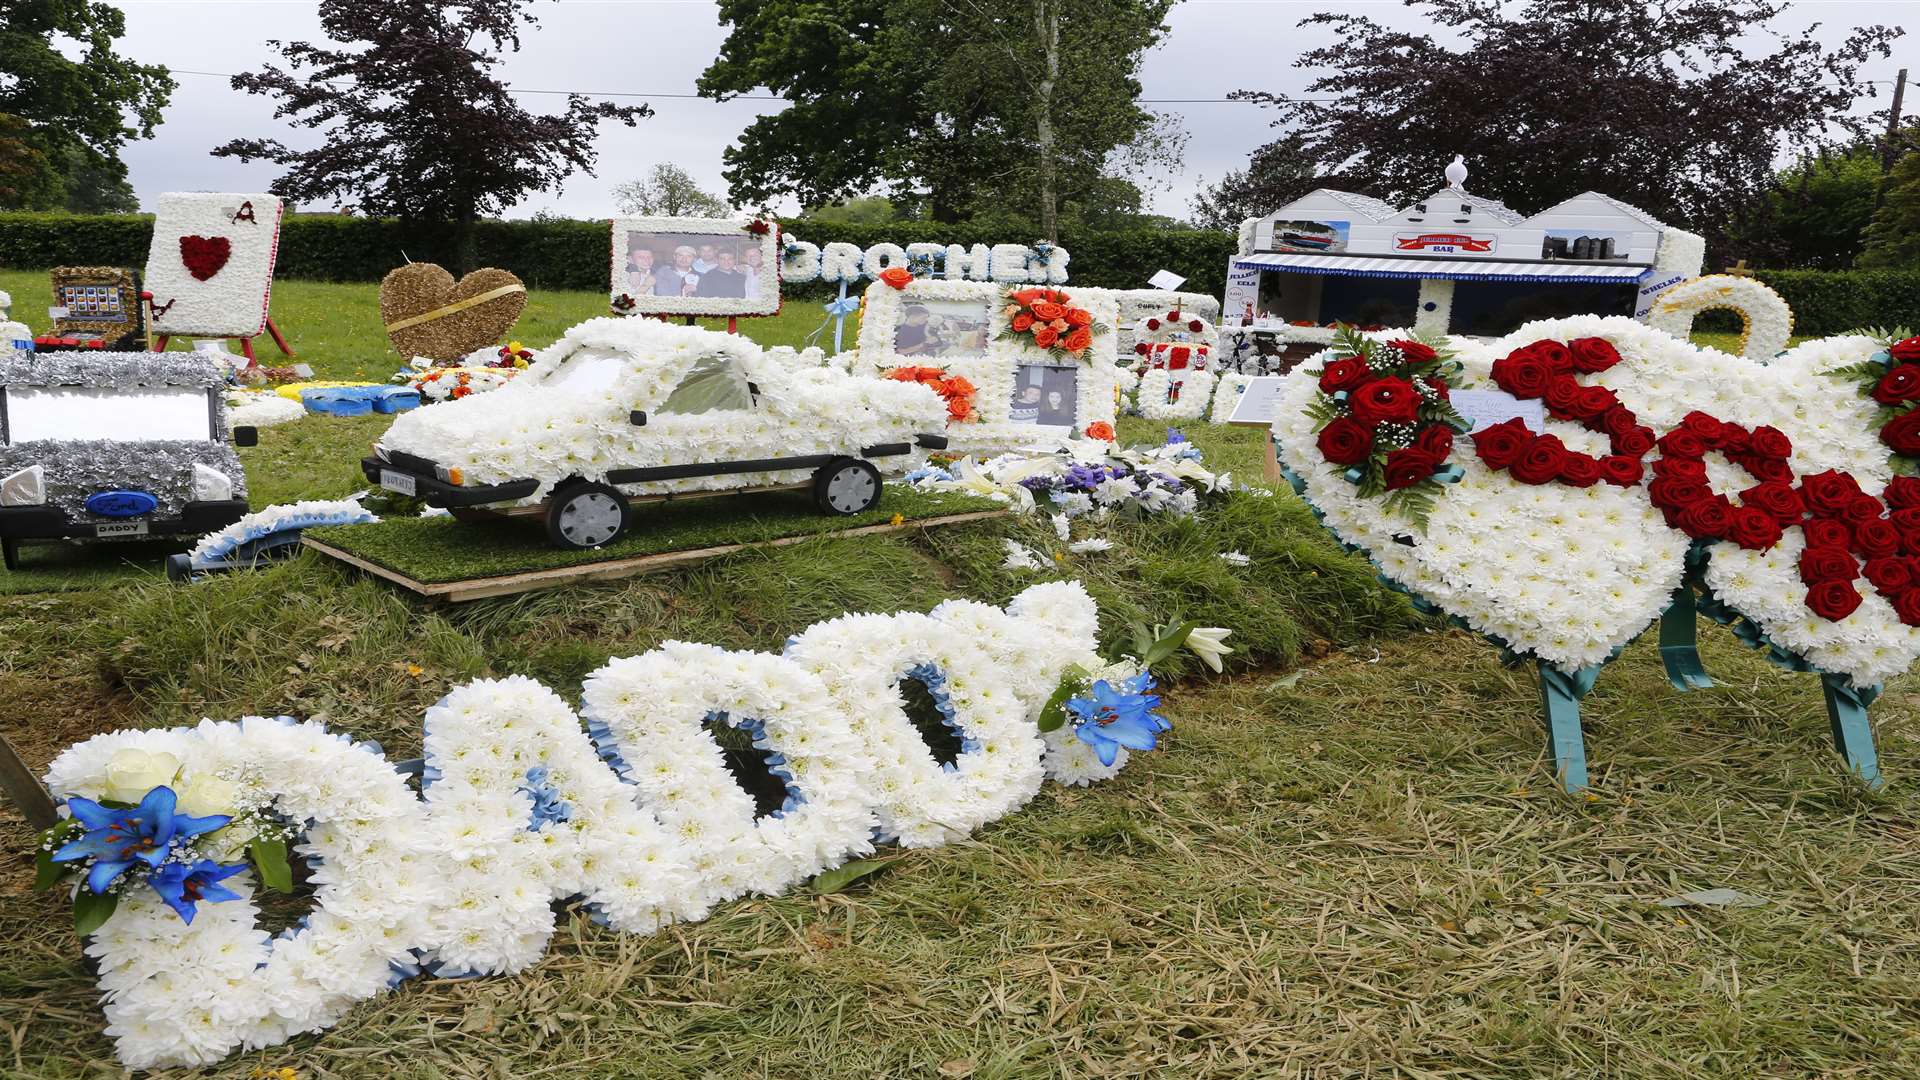 Floral tributes to “Curly Bill” at Cranbrook Cemetery